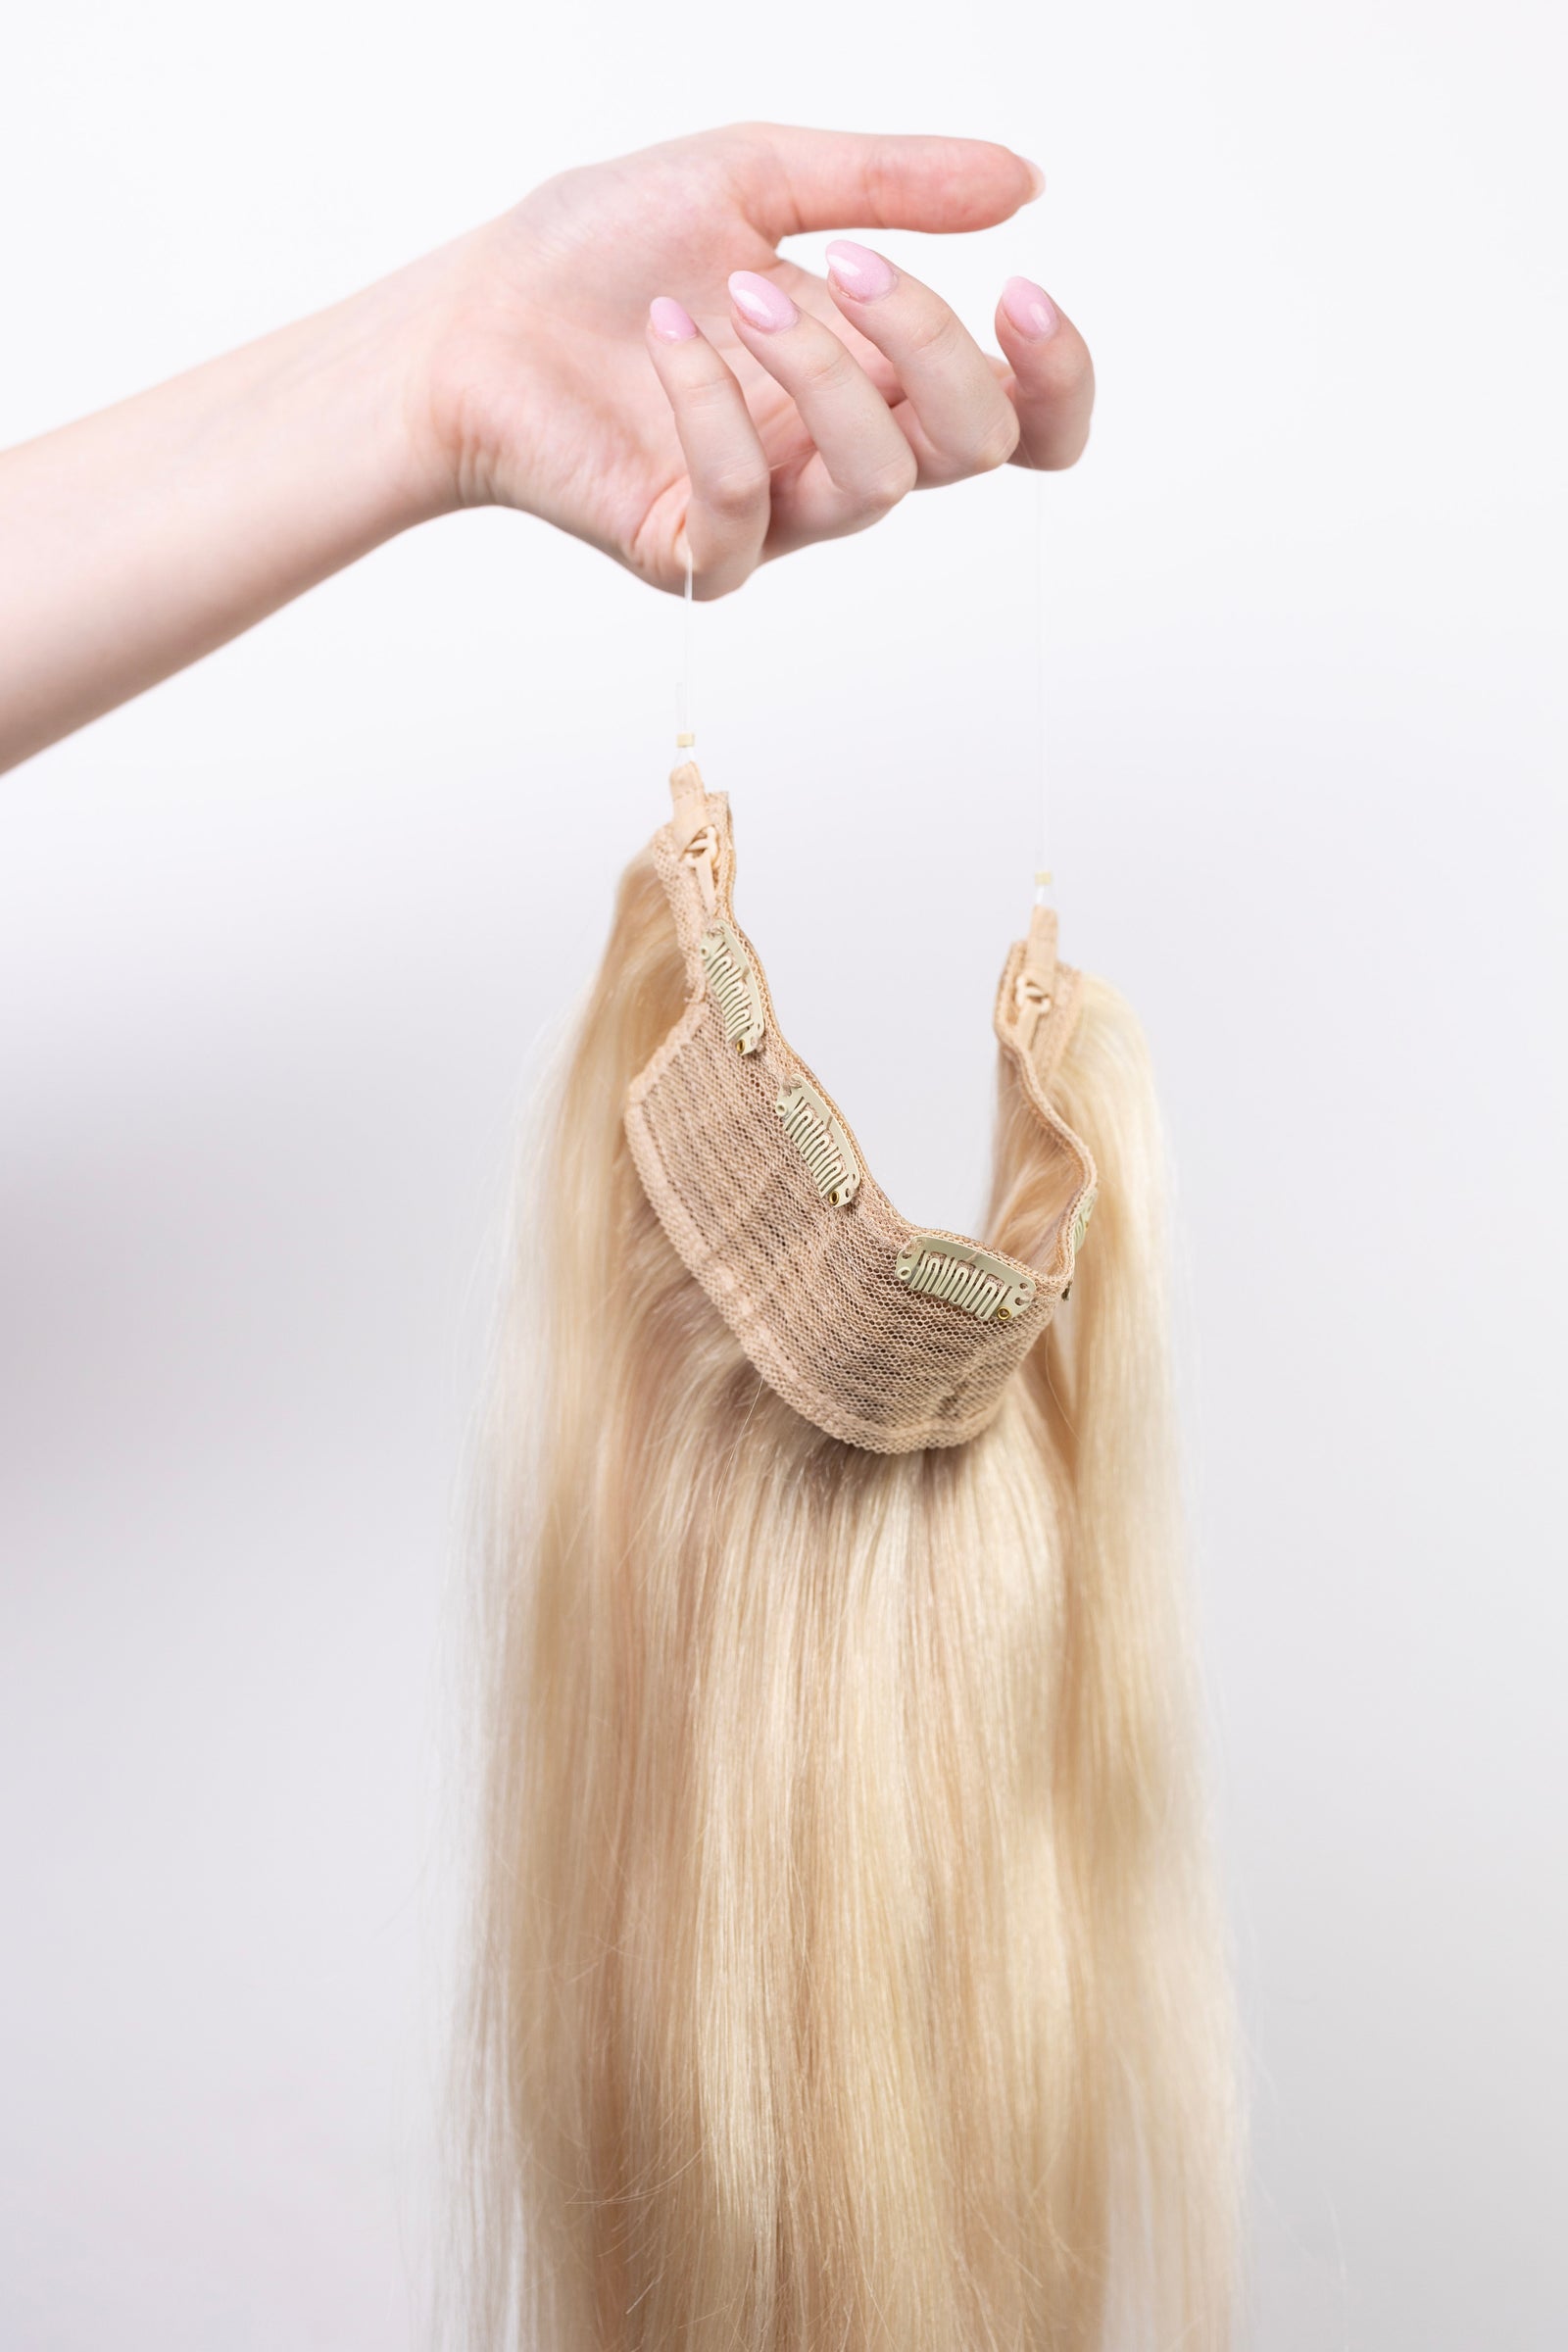 Seamless Invisible hair extensions NEW LAUNCH 🚨 This is the